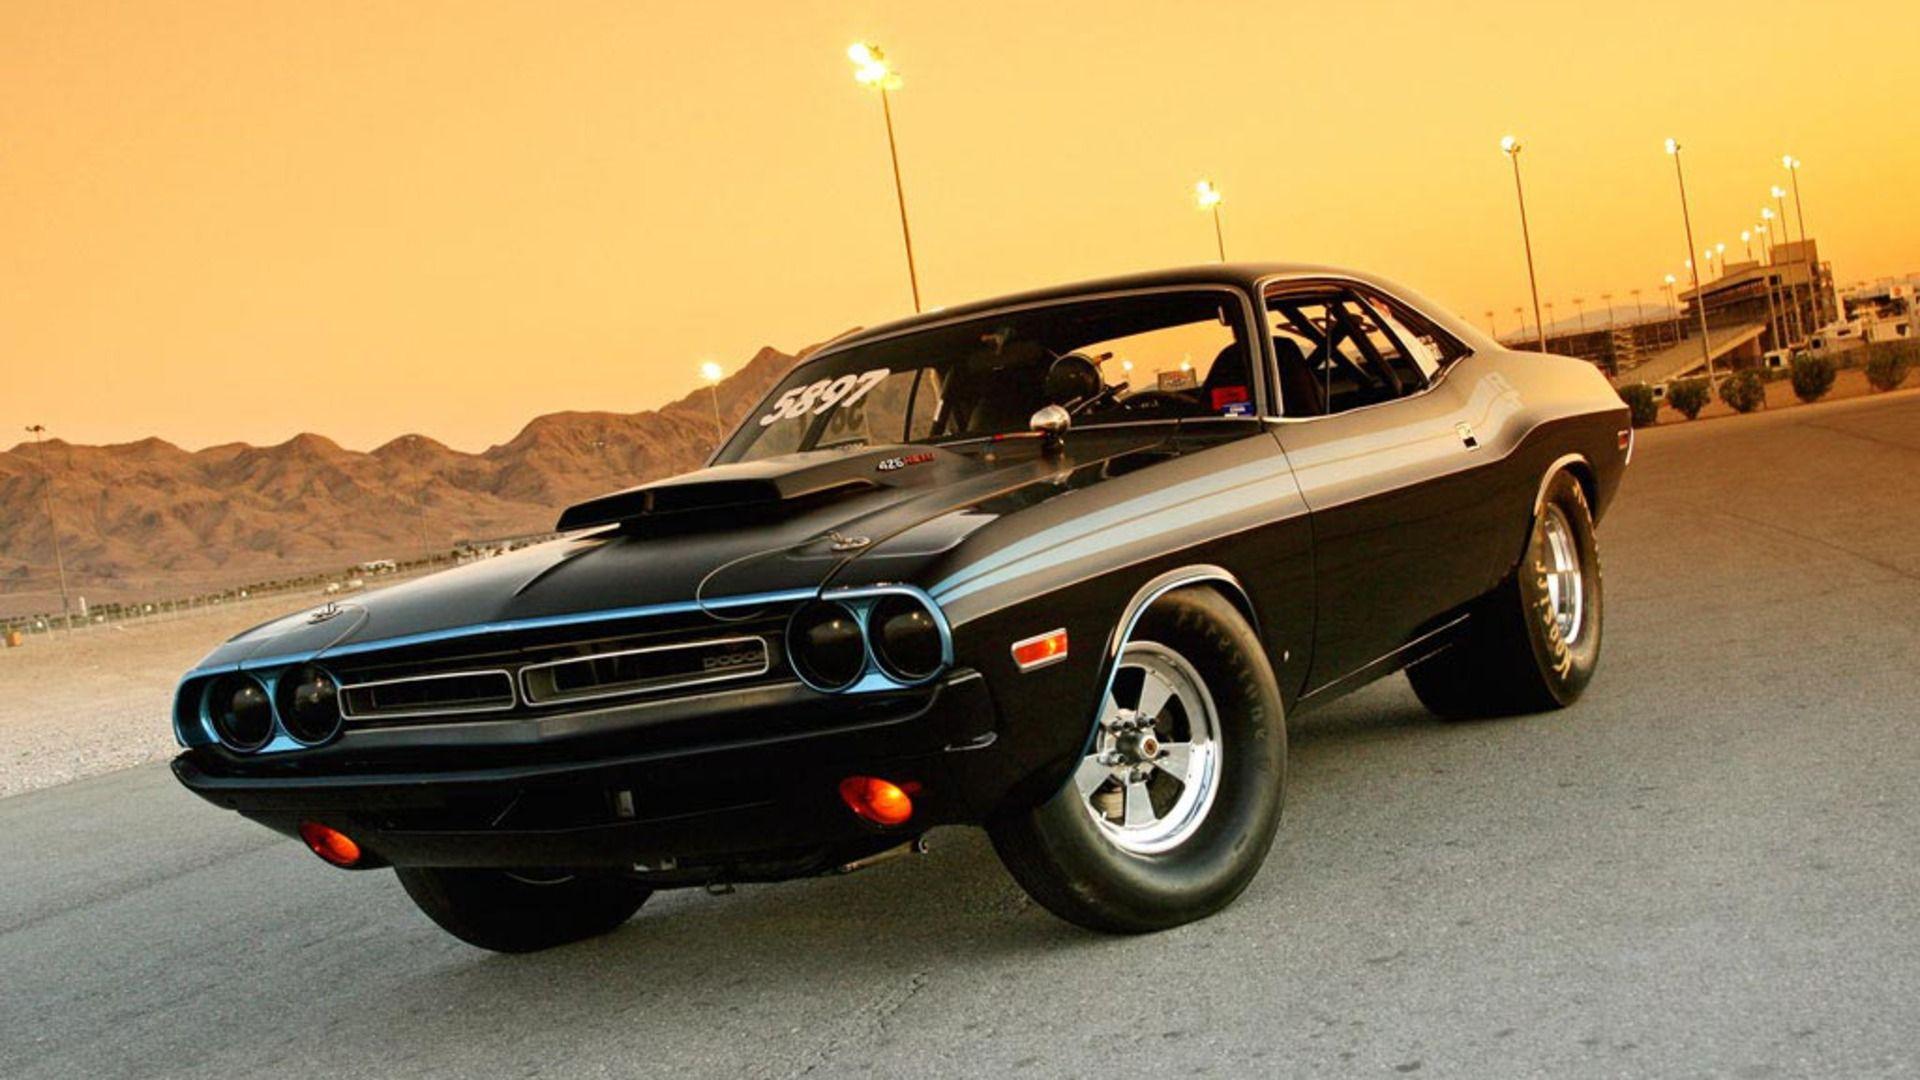 Cool Muscle Car Wallpaper Large HD